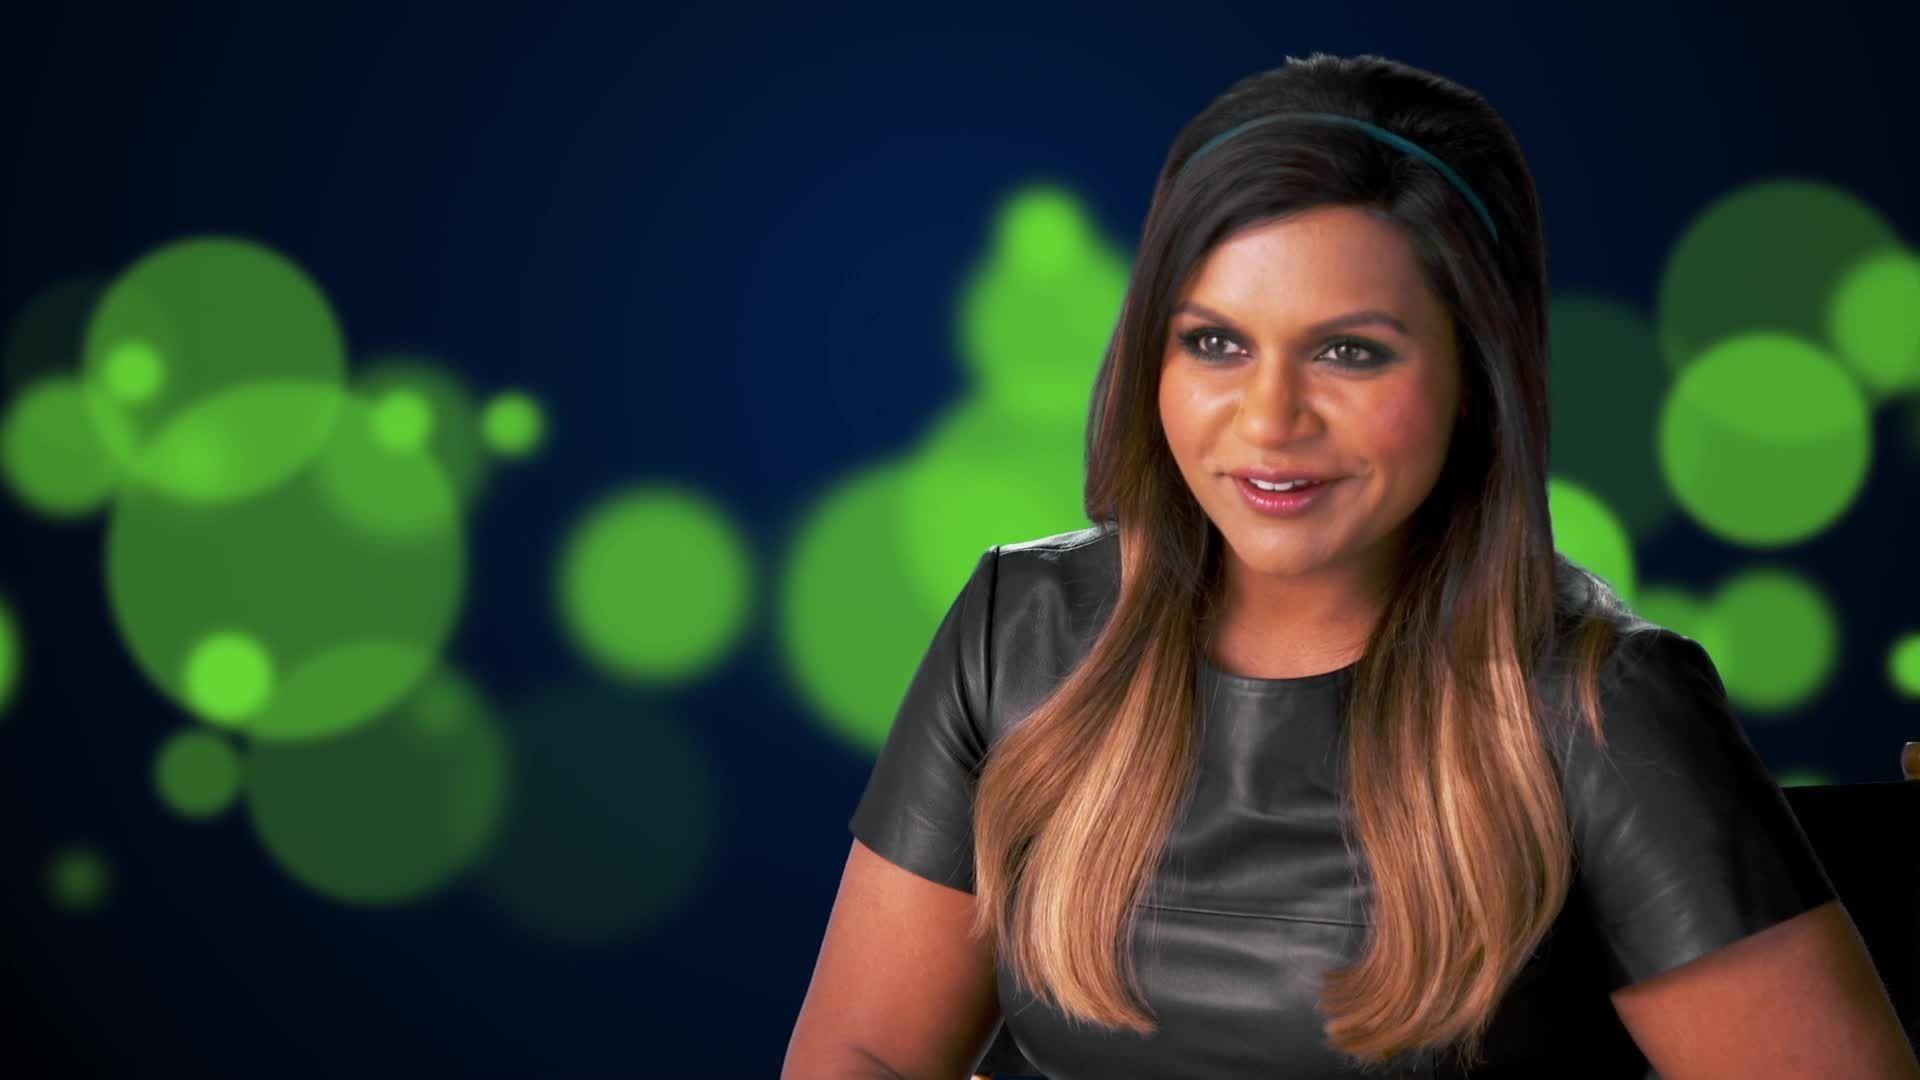 Inside Out the Scenes Interview with Mindy Kaling